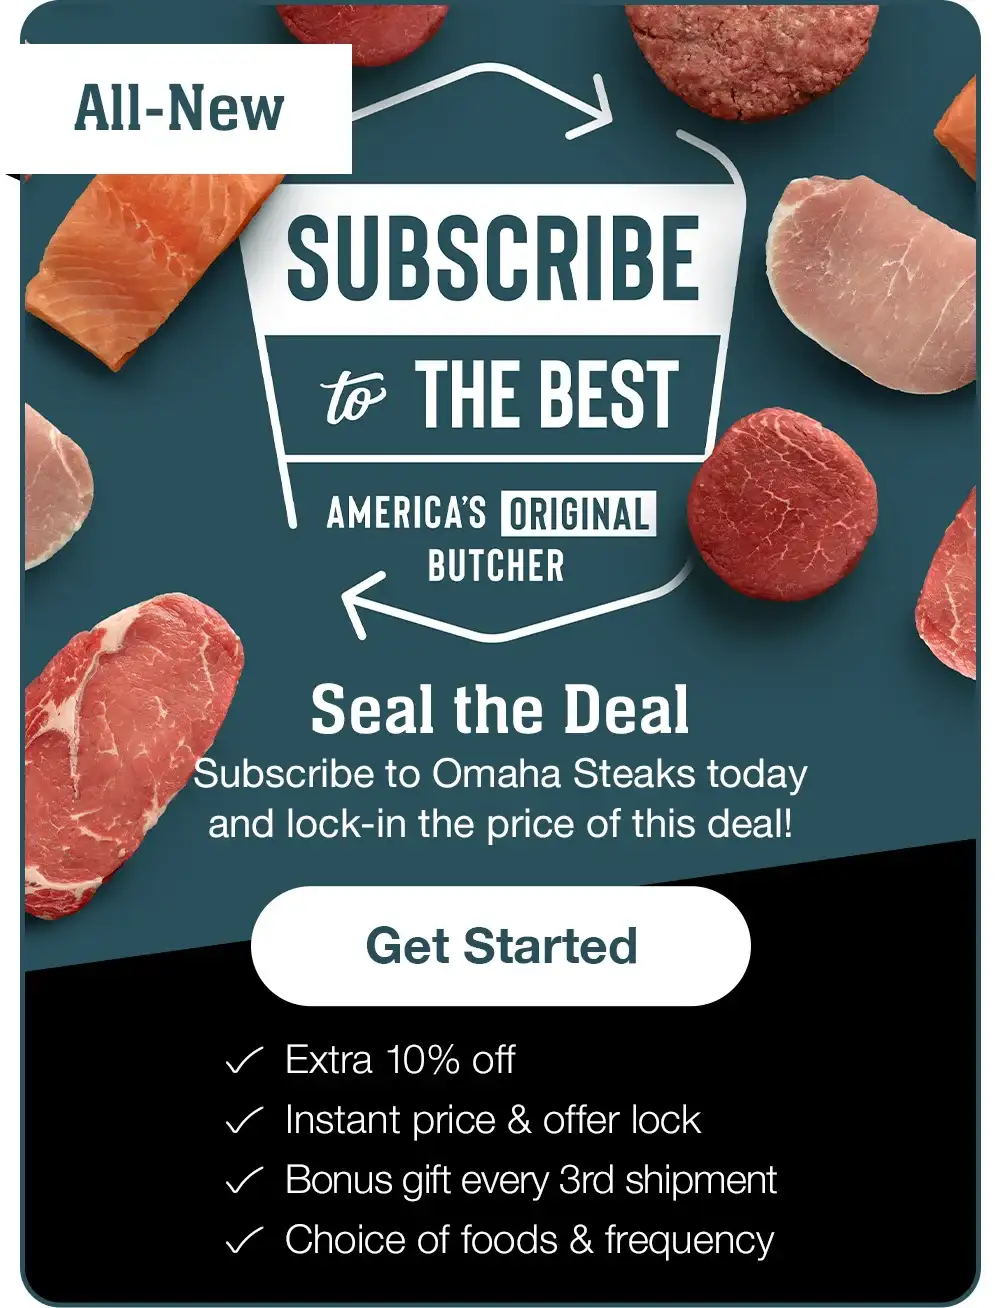 ALL NEW | SUBSCRIBE TO THE BEST - AMERICA’S ORIGINAL BUTCHER | Seal the Deal - Subscribe to Omaha Steaks today and lock-in the price of this deal! || Get Started || Extra 10% off | Instant price & offer lock | Bonus gift every 3rd shipment | Choice of foods & frequency